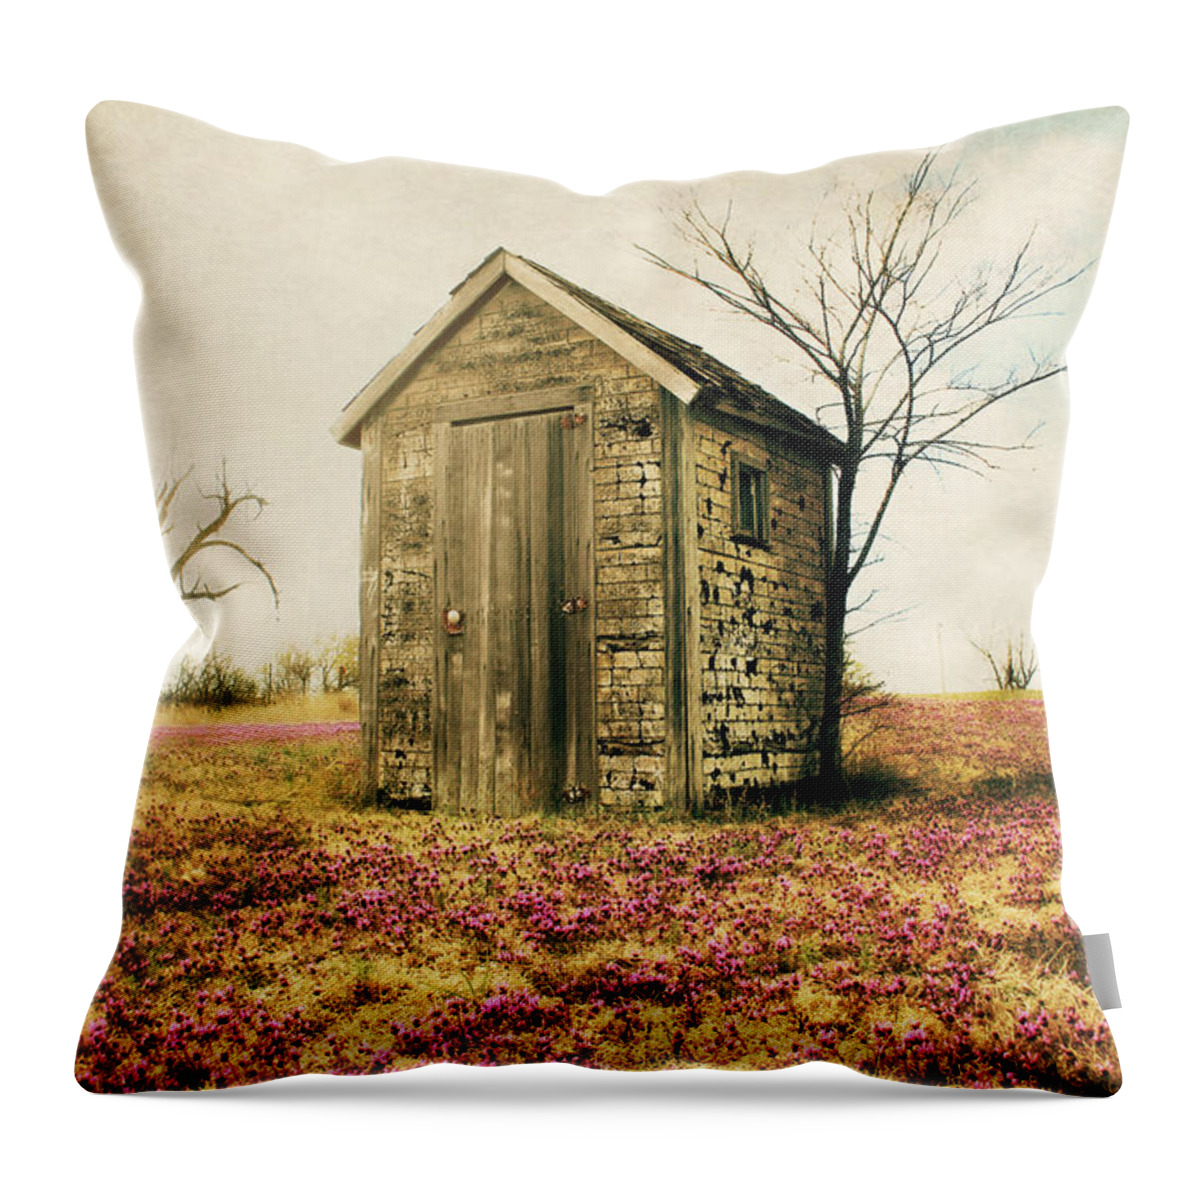 Outhouse Throw Pillow featuring the photograph Outhouse by Julie Hamilton